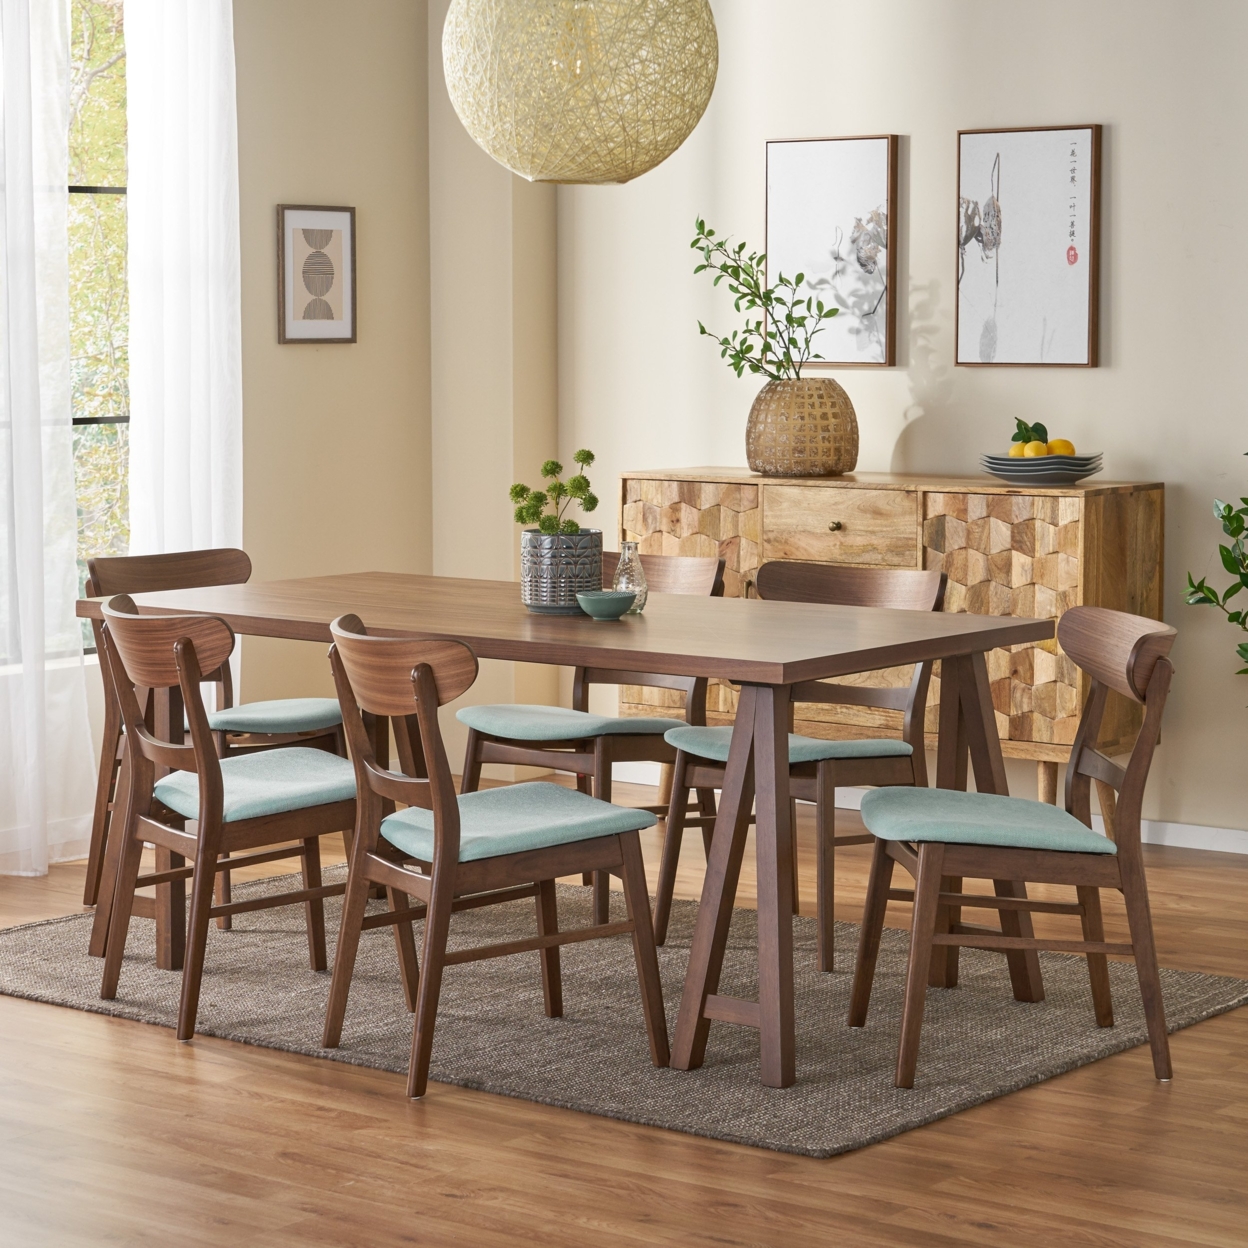 Randal Mid-Century Modern 7 Piece Dining Set With A-Frame Table - Walnut/mint